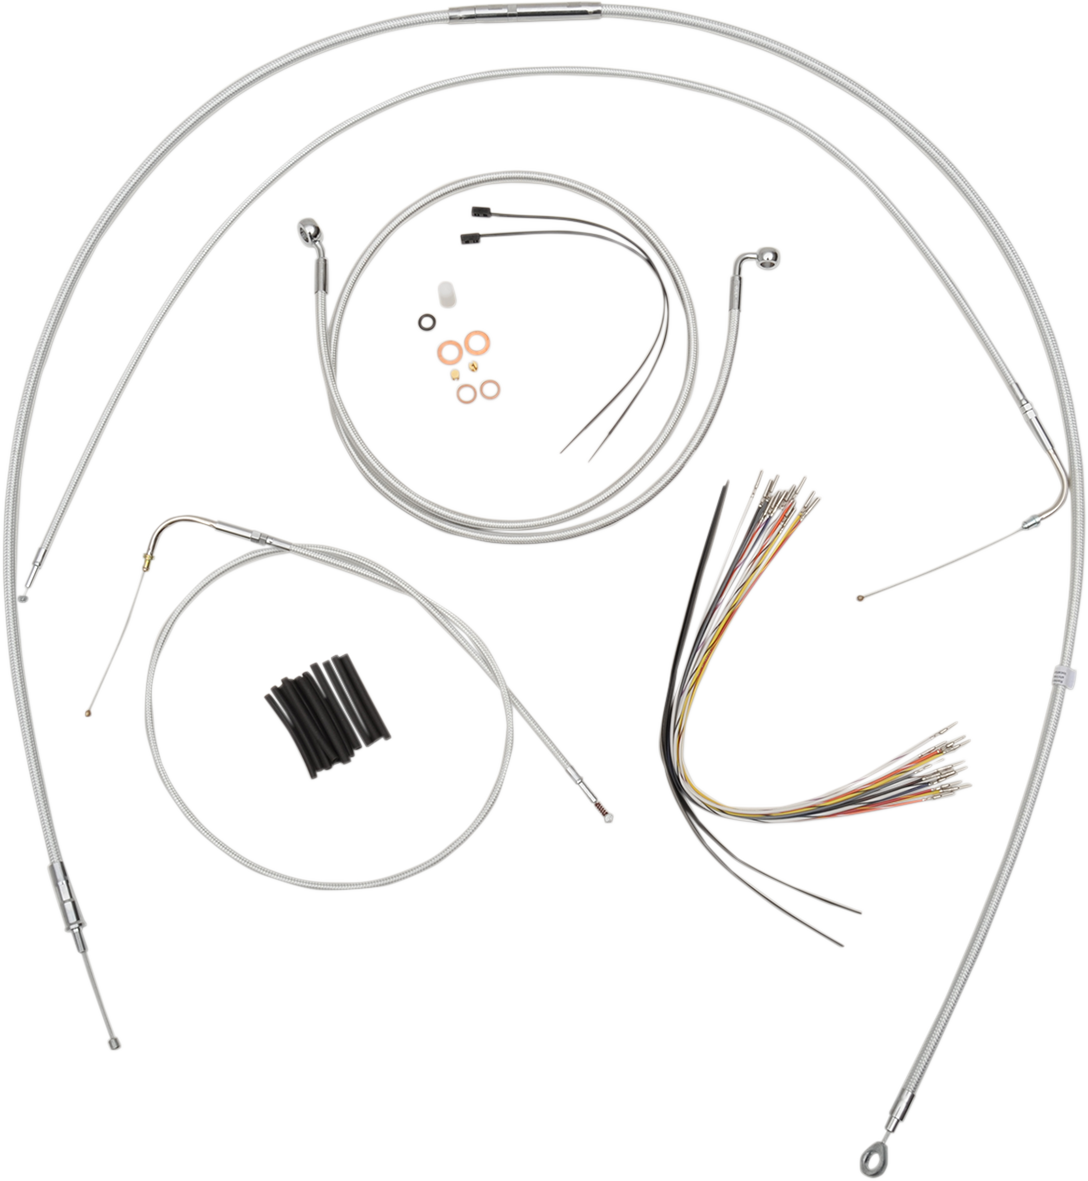 0662-0118 - MAGNUM Control Cable Kit - Sterling Chromite II? 387791